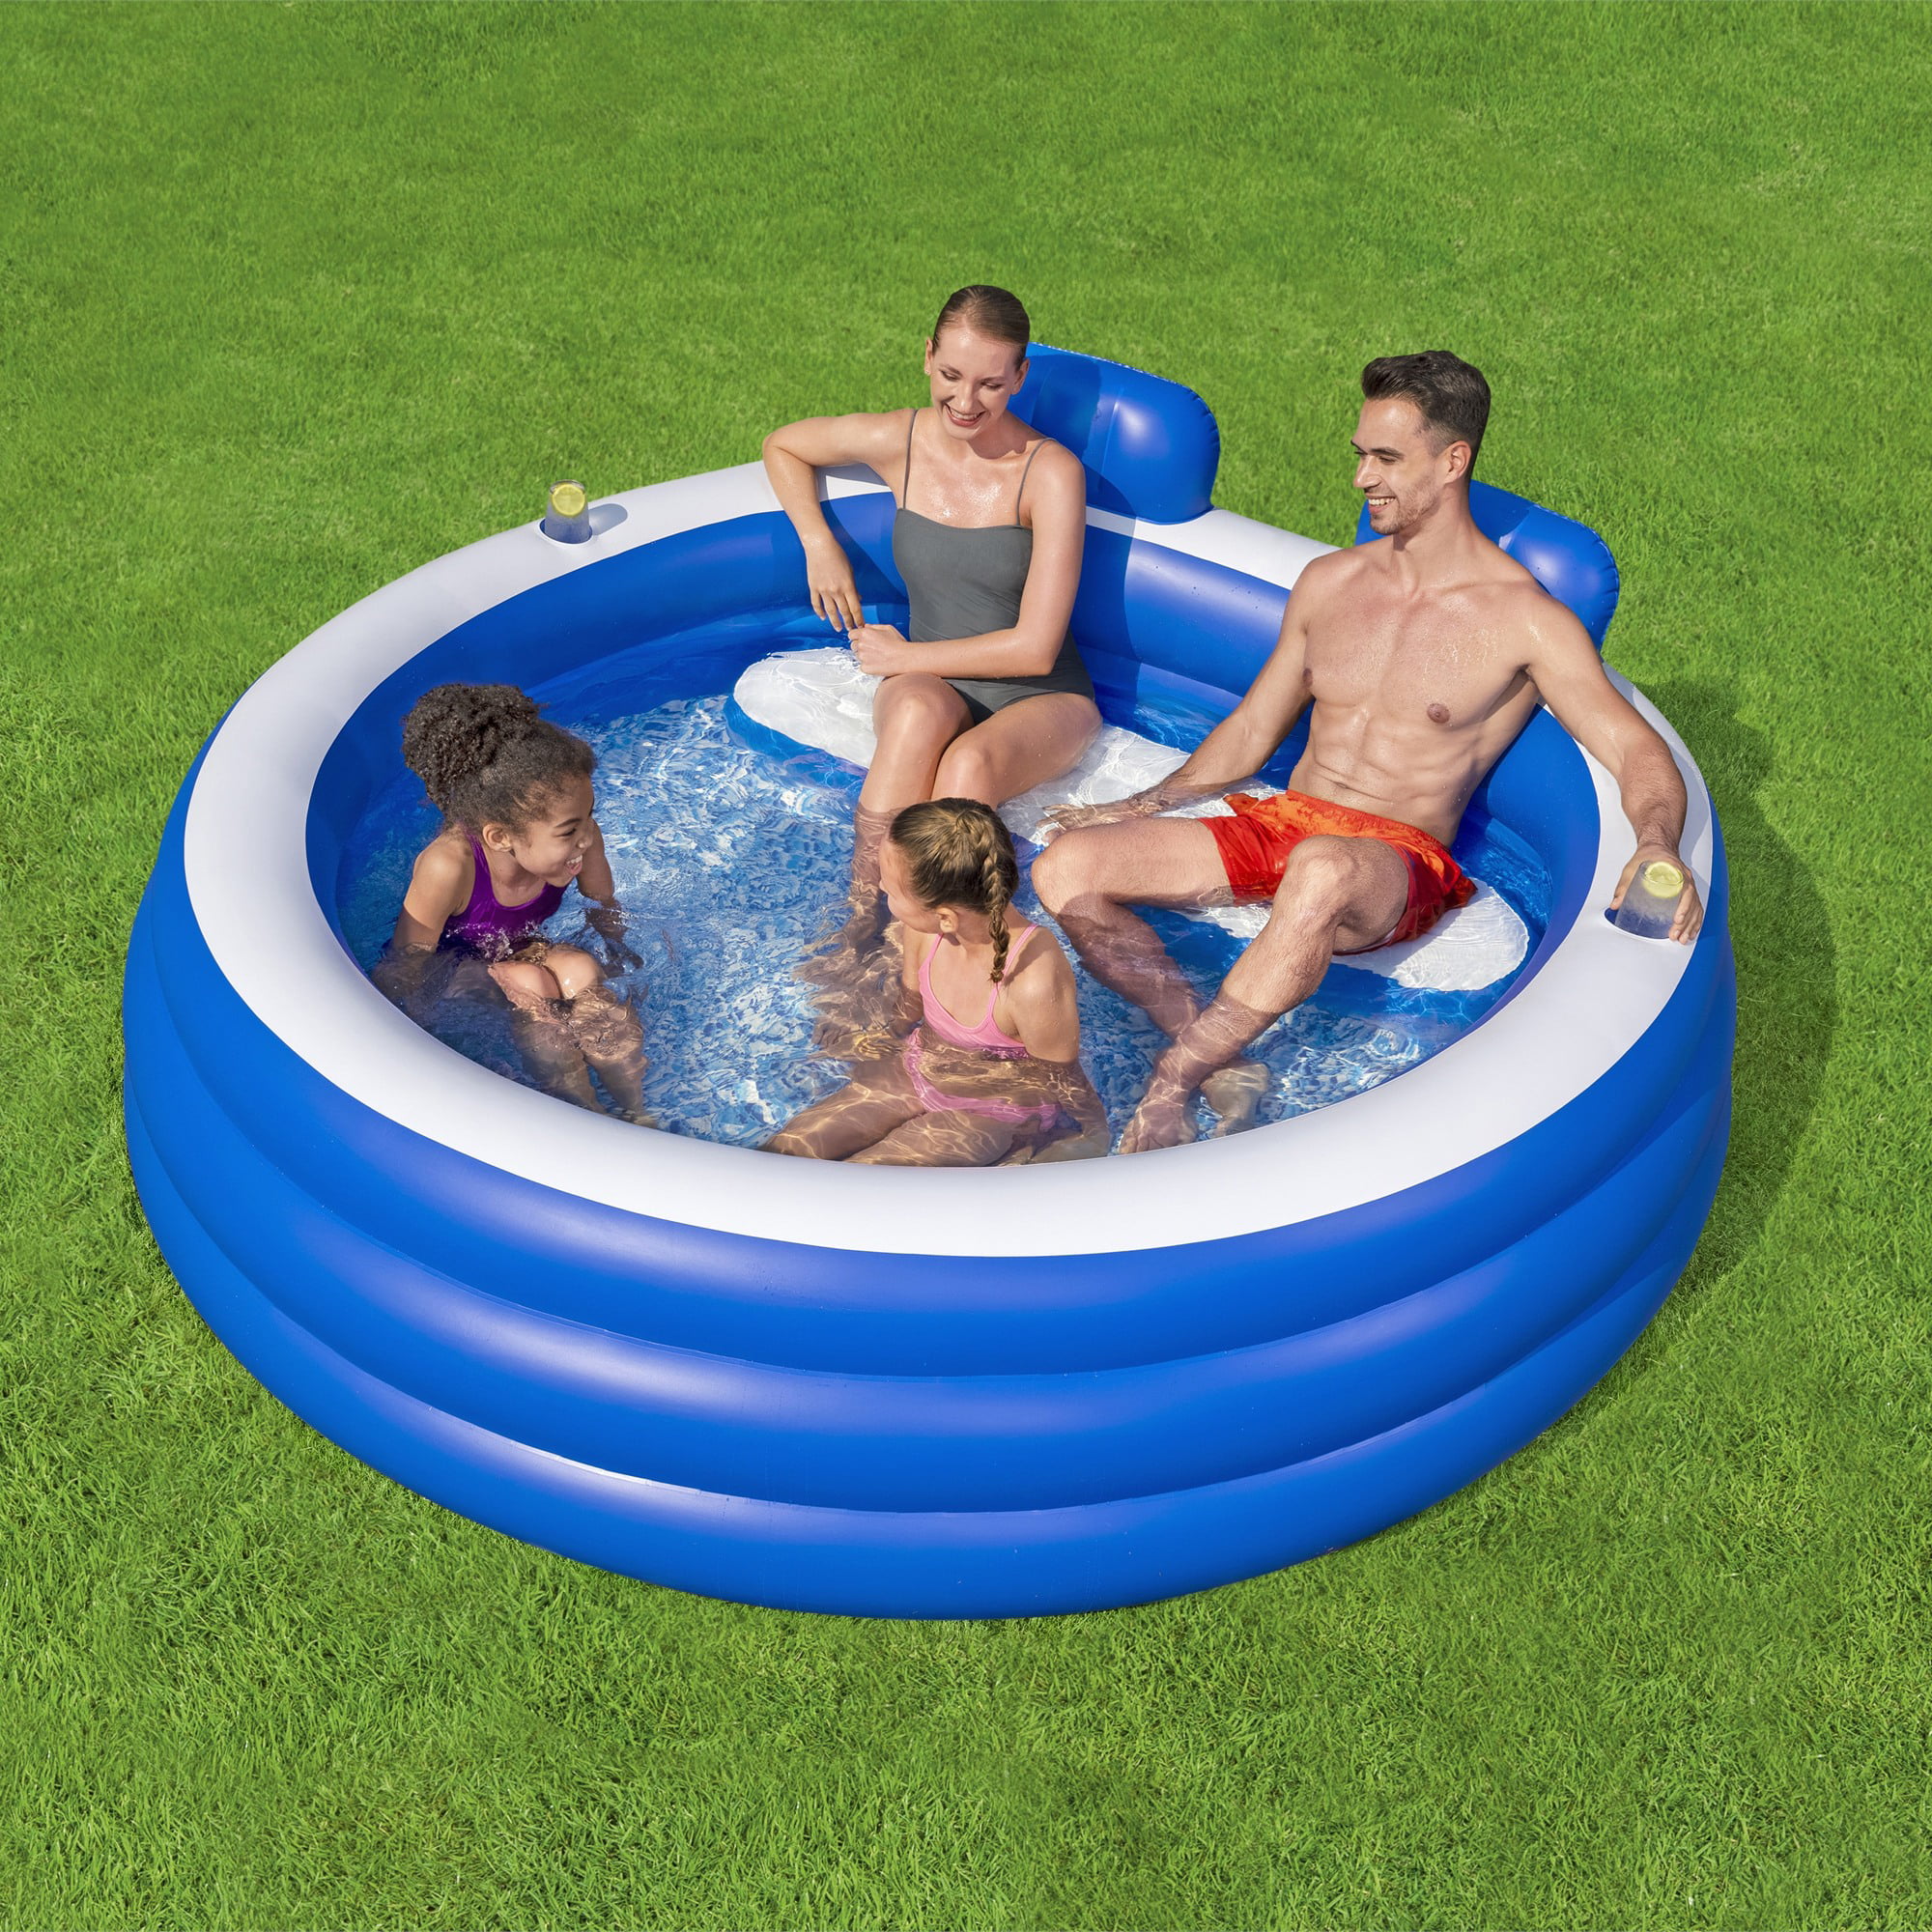 H2OGO! Splash Paradise Pool 7'7" x 7'2" x 31" - Inflatable, Blue & White, Bestway, 225 Gallon Capacity, Outdoor & Backyard, Bench Seat, Built-In Cupholders, Suitable For Children Ages 6+ - Walmart.com